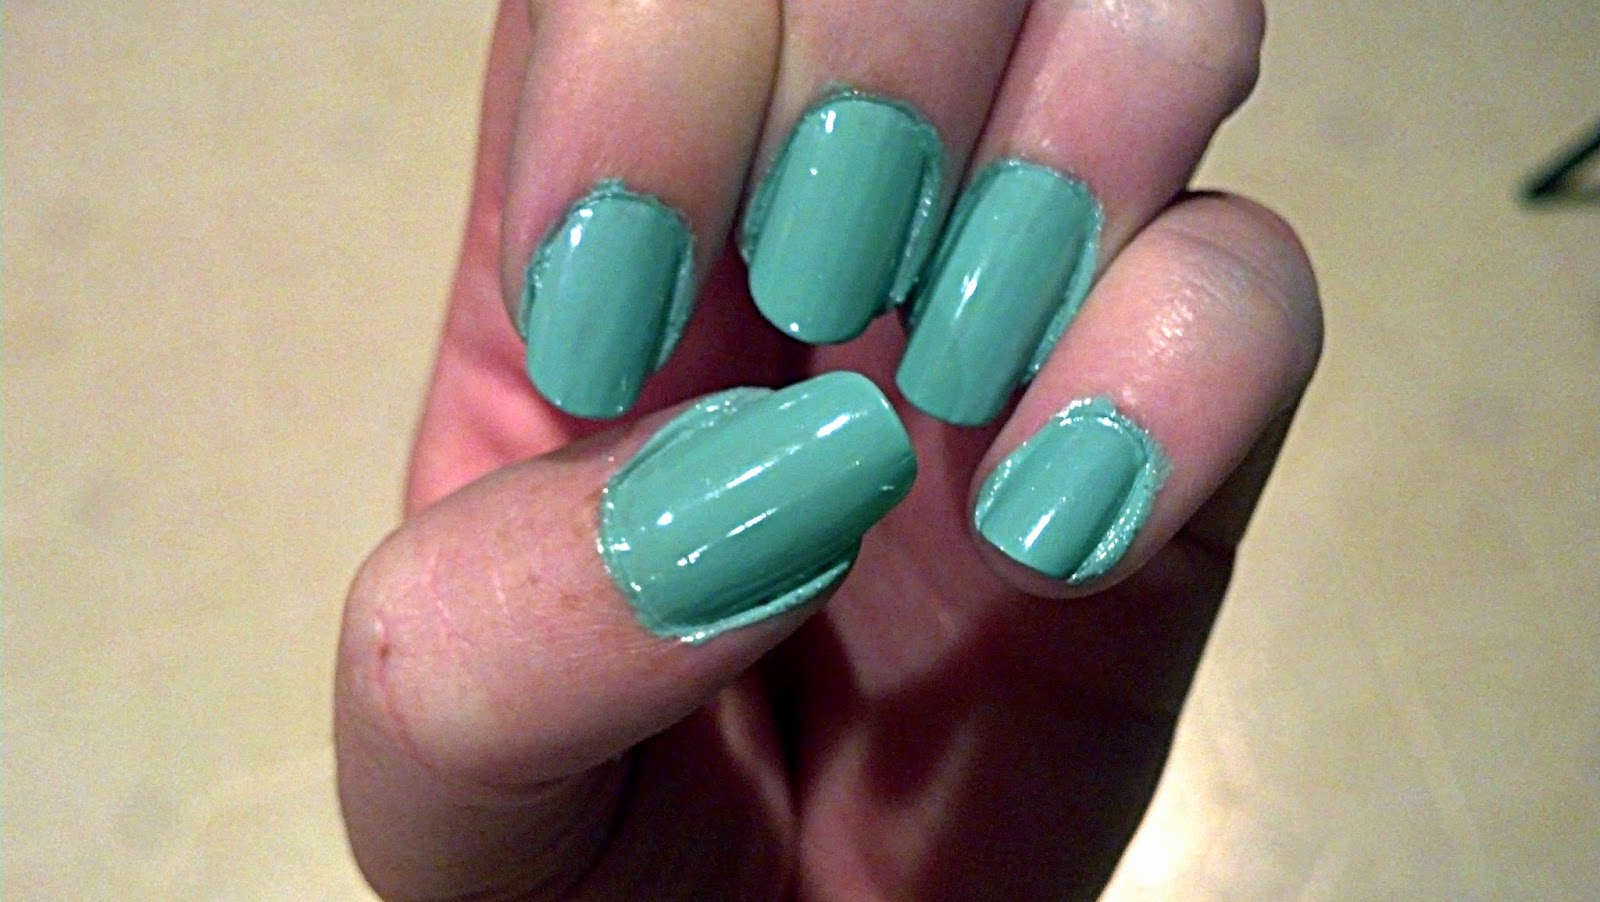 3. Two Color Nail Designs for Short Nails - wide 3